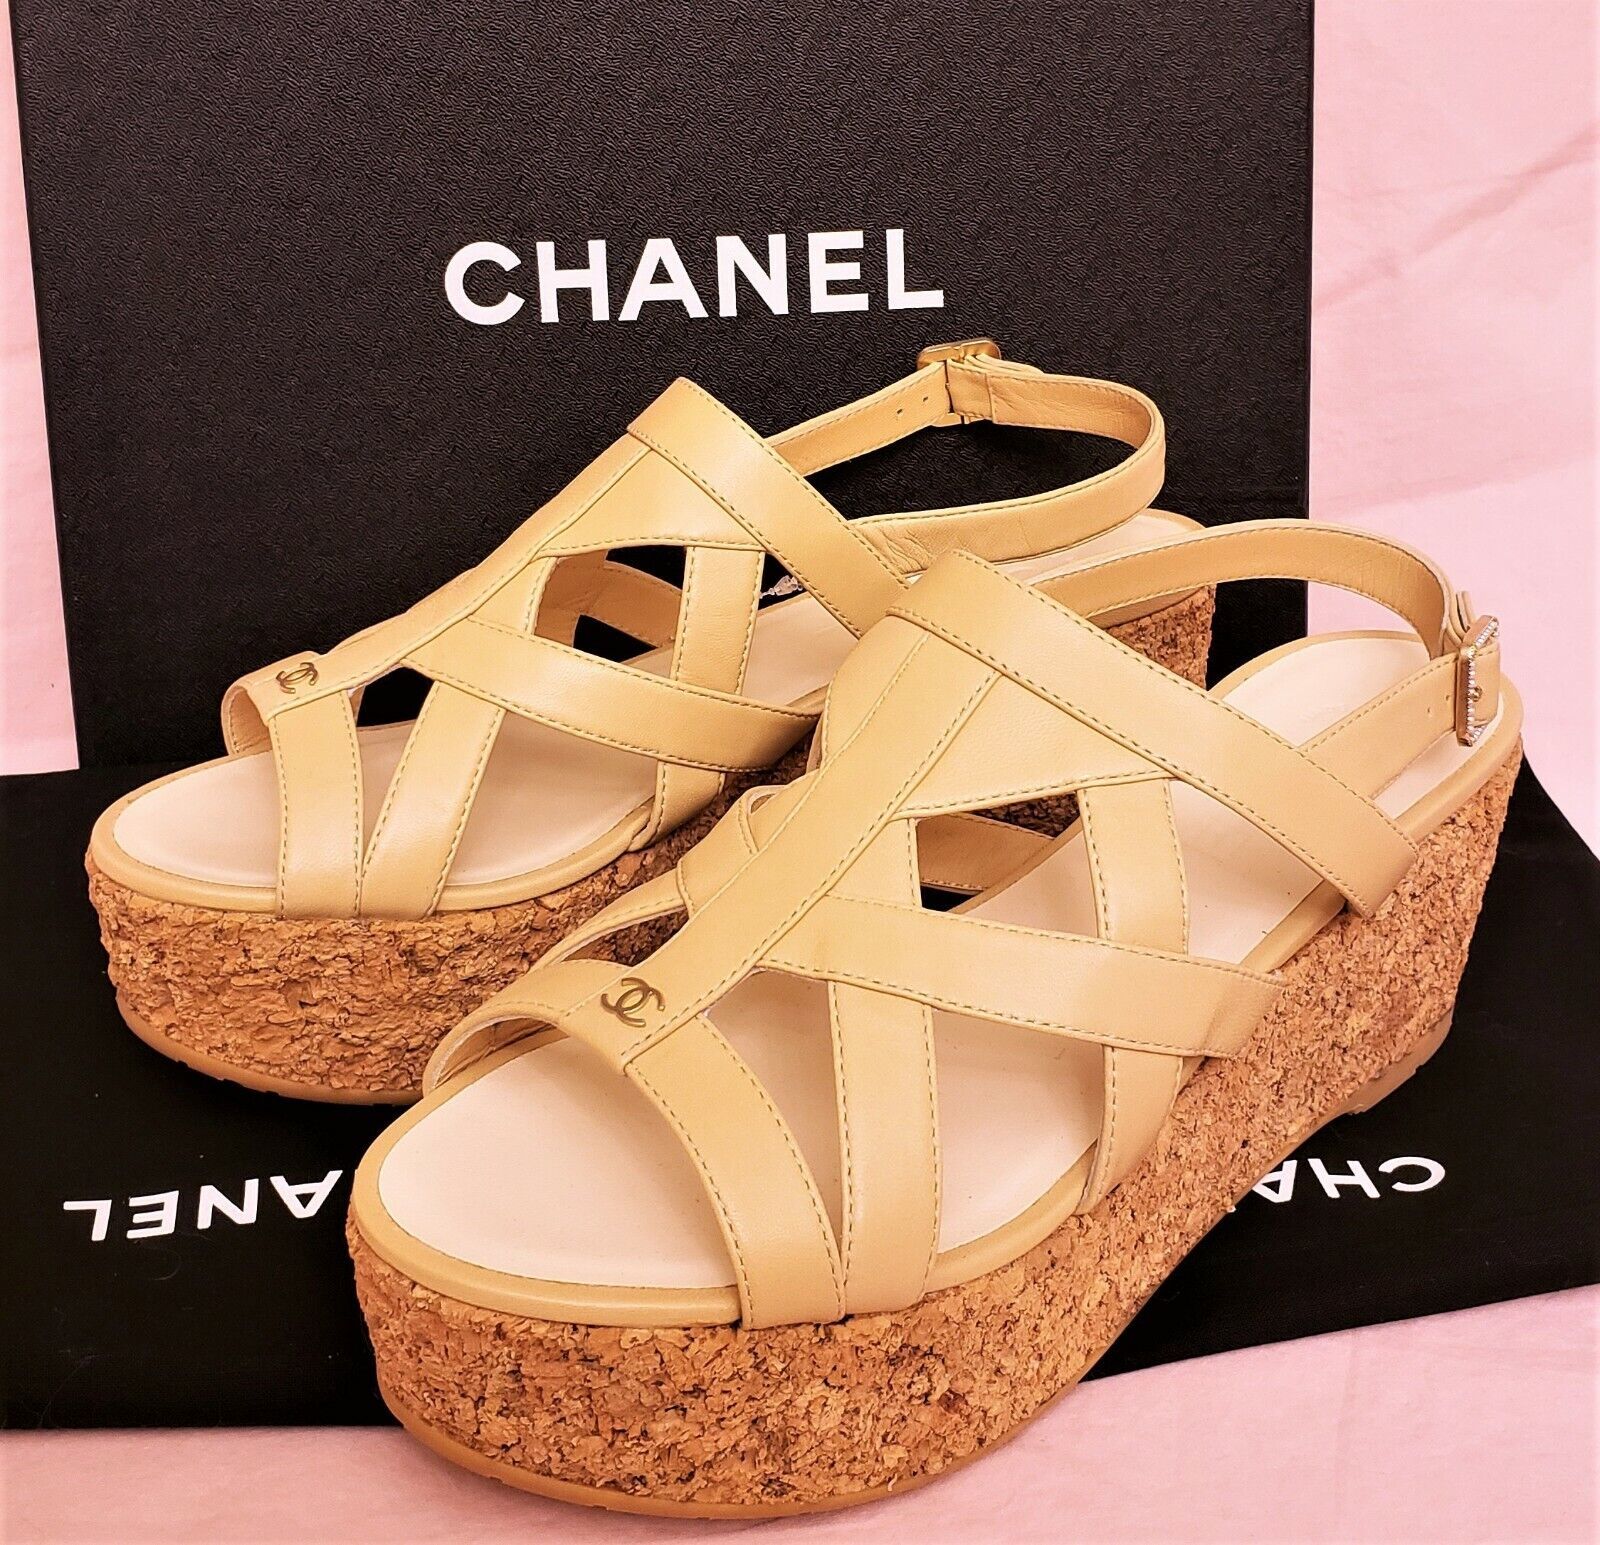 womens chanel shoes size 39